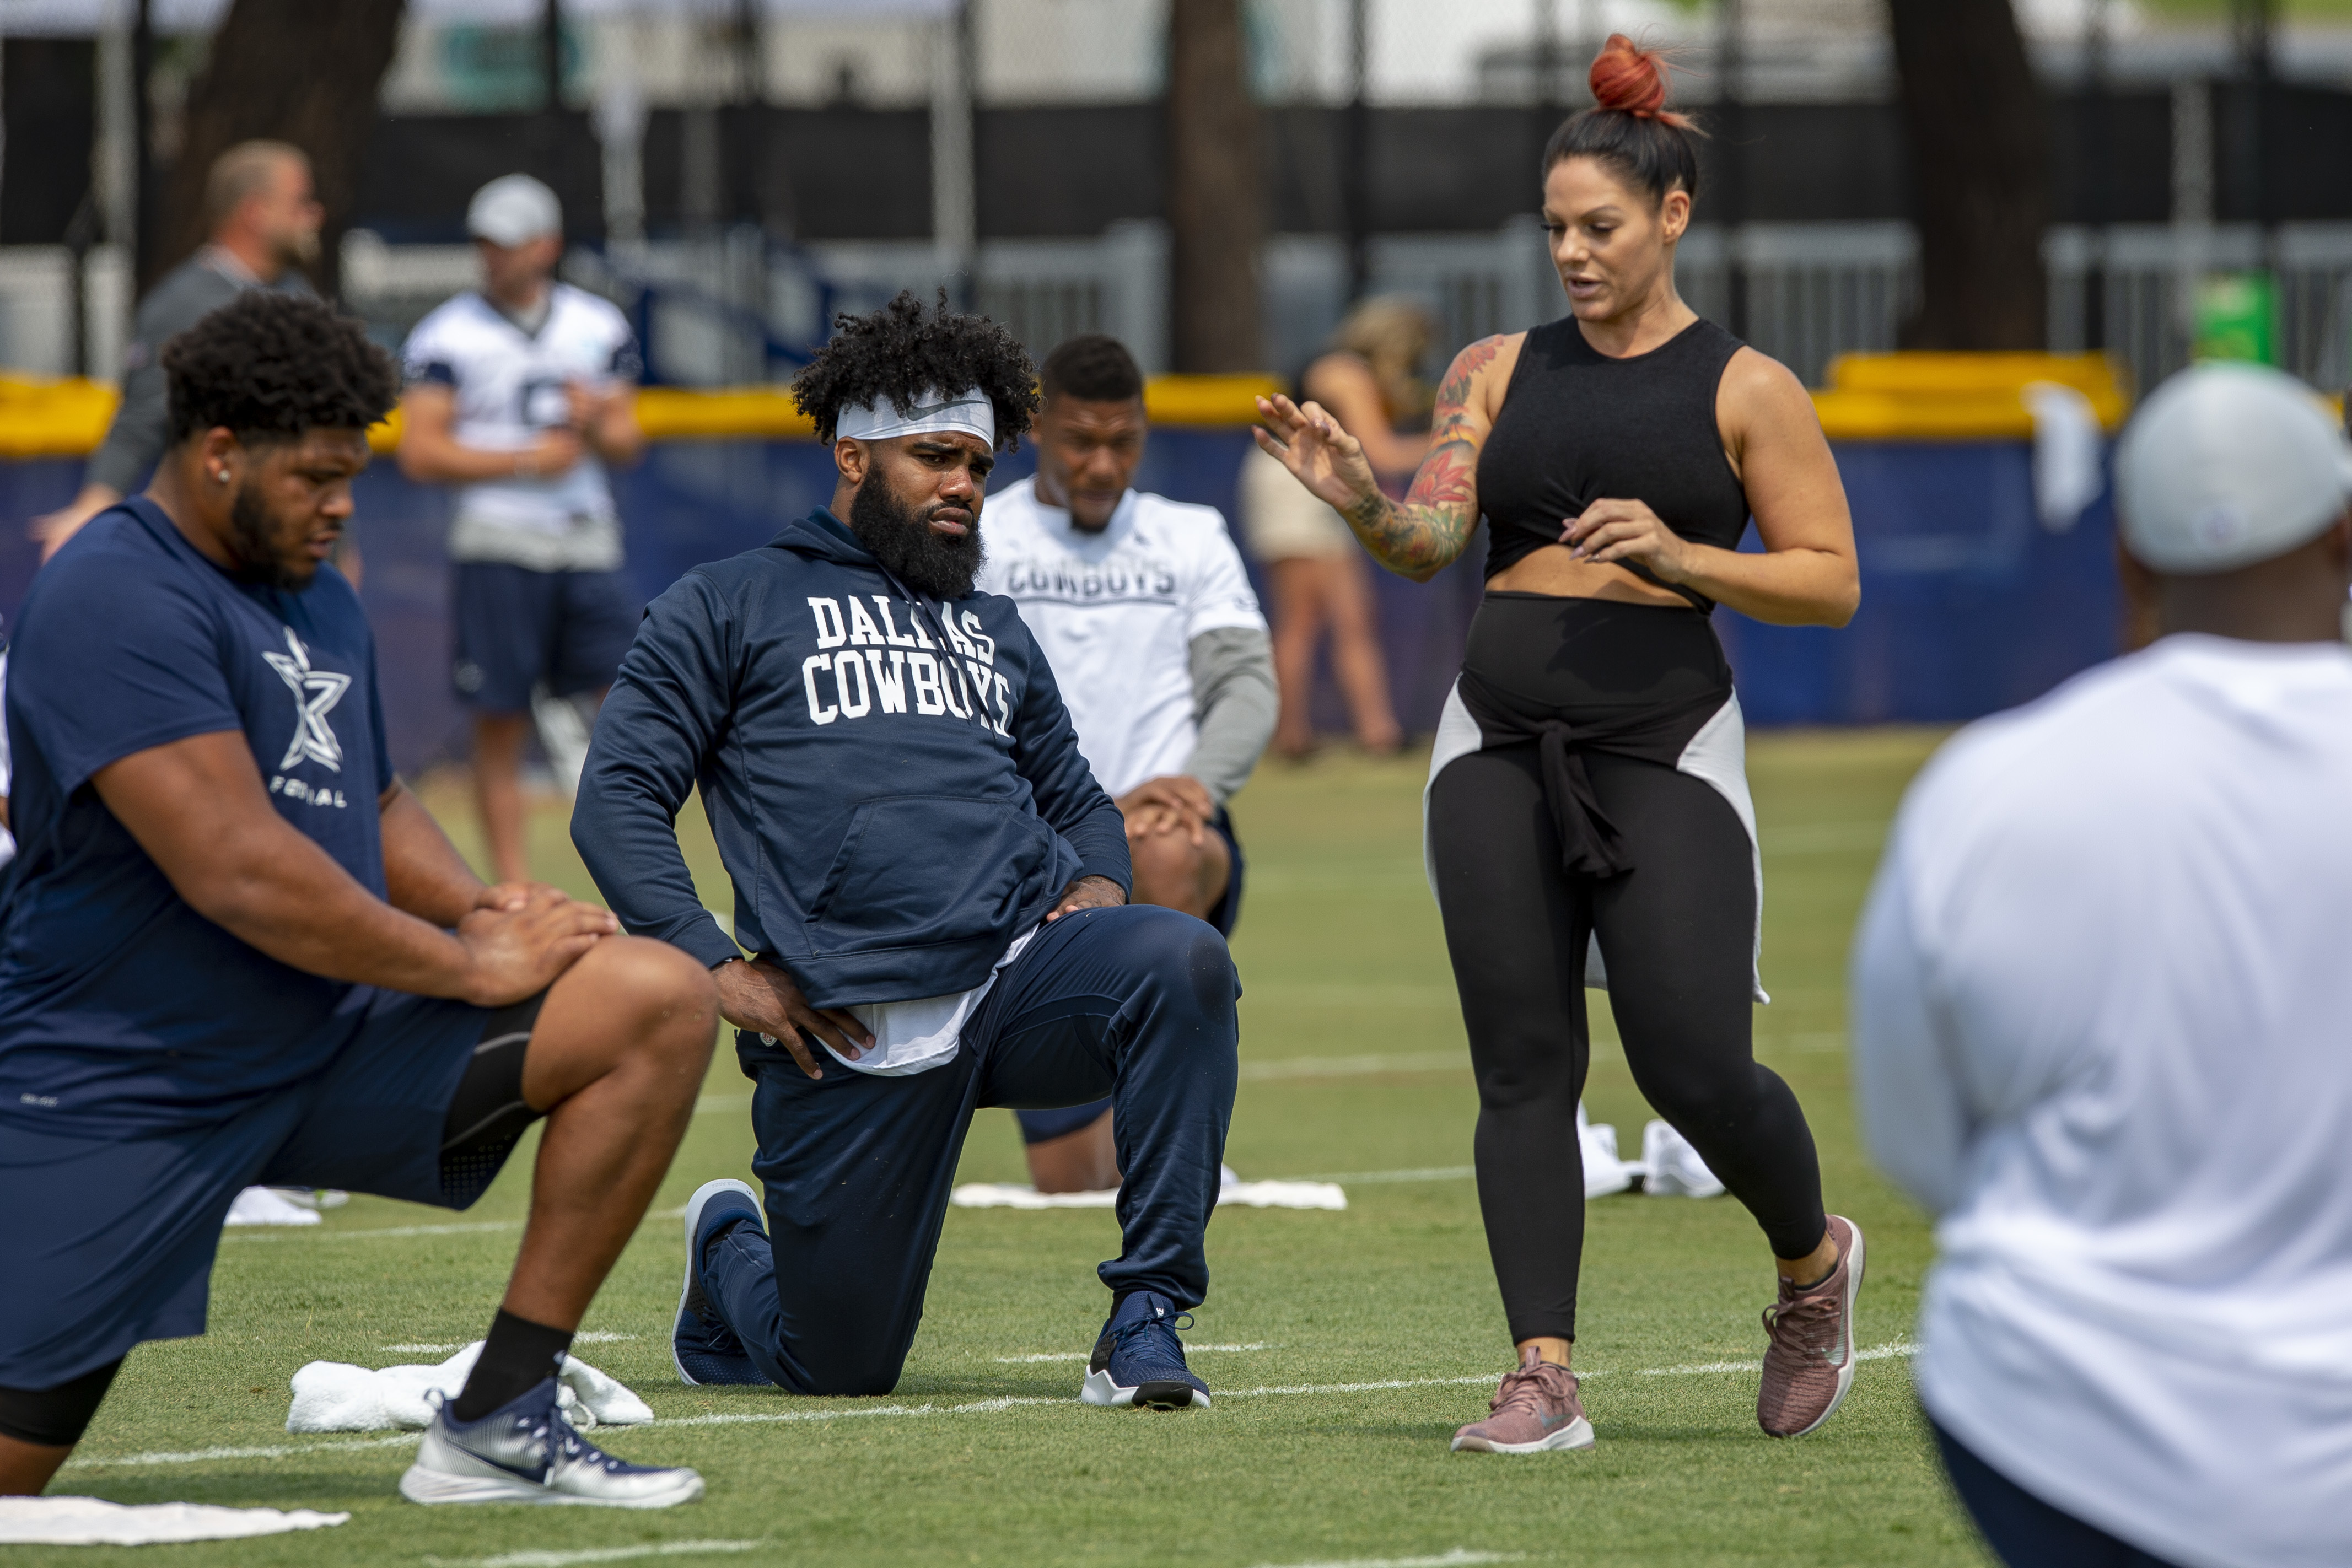 Tackle this: NFL players benefit from regular yoga practice